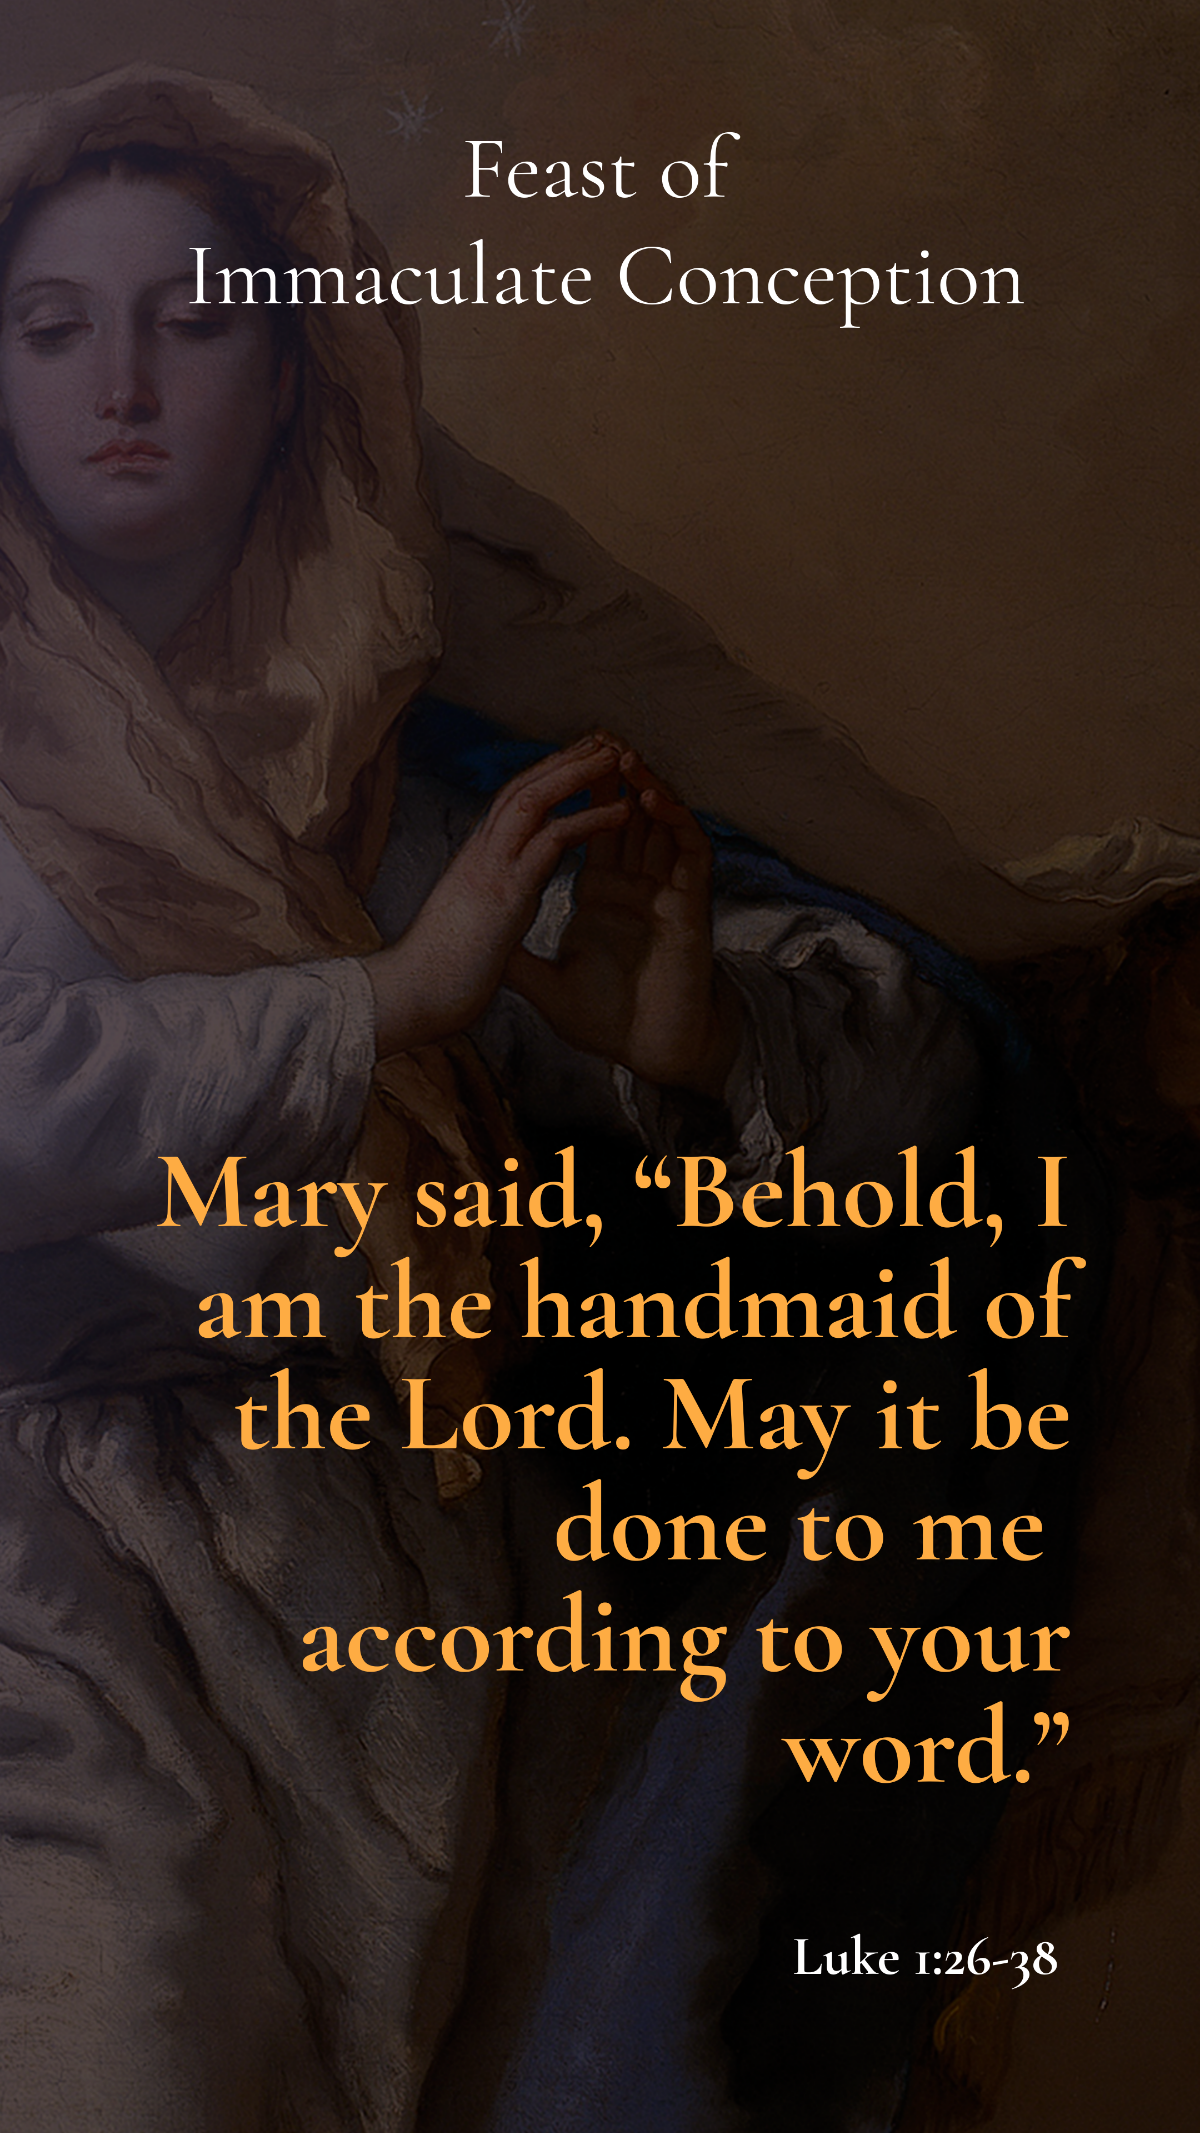 Simple Feast of the Immaculate Conception Quote